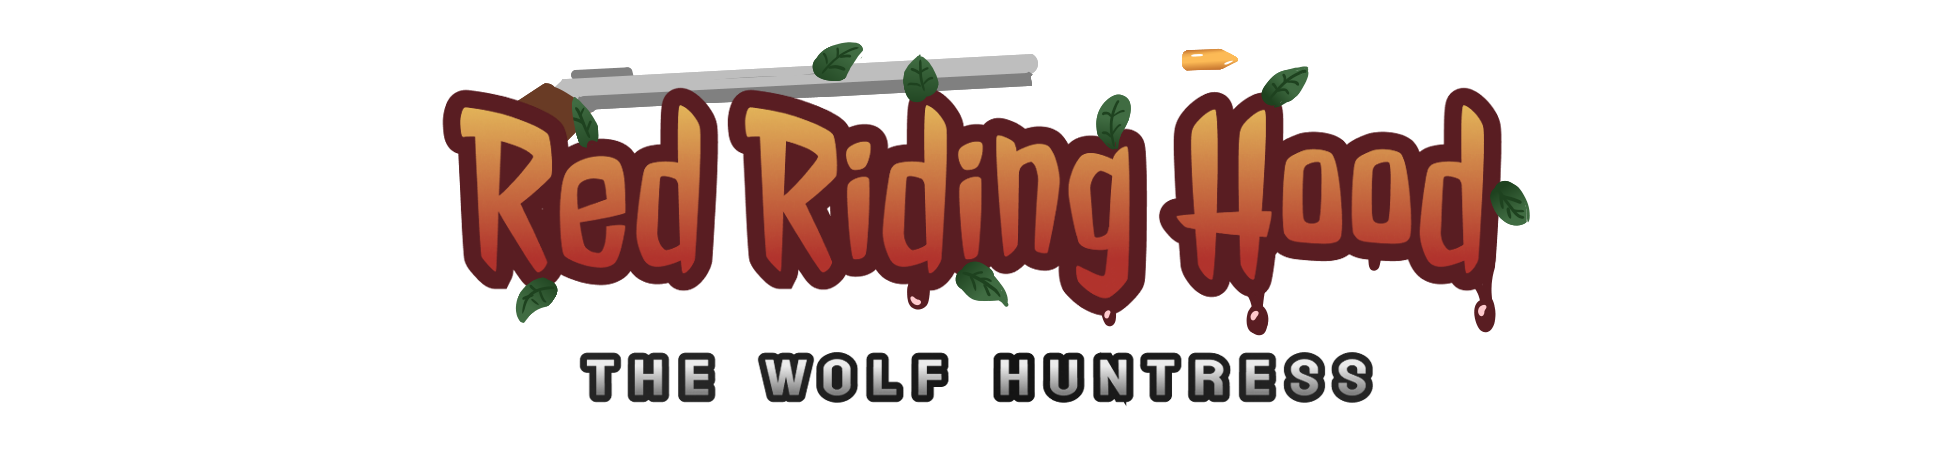 Red Ridding Hood : The Wolf Huntress